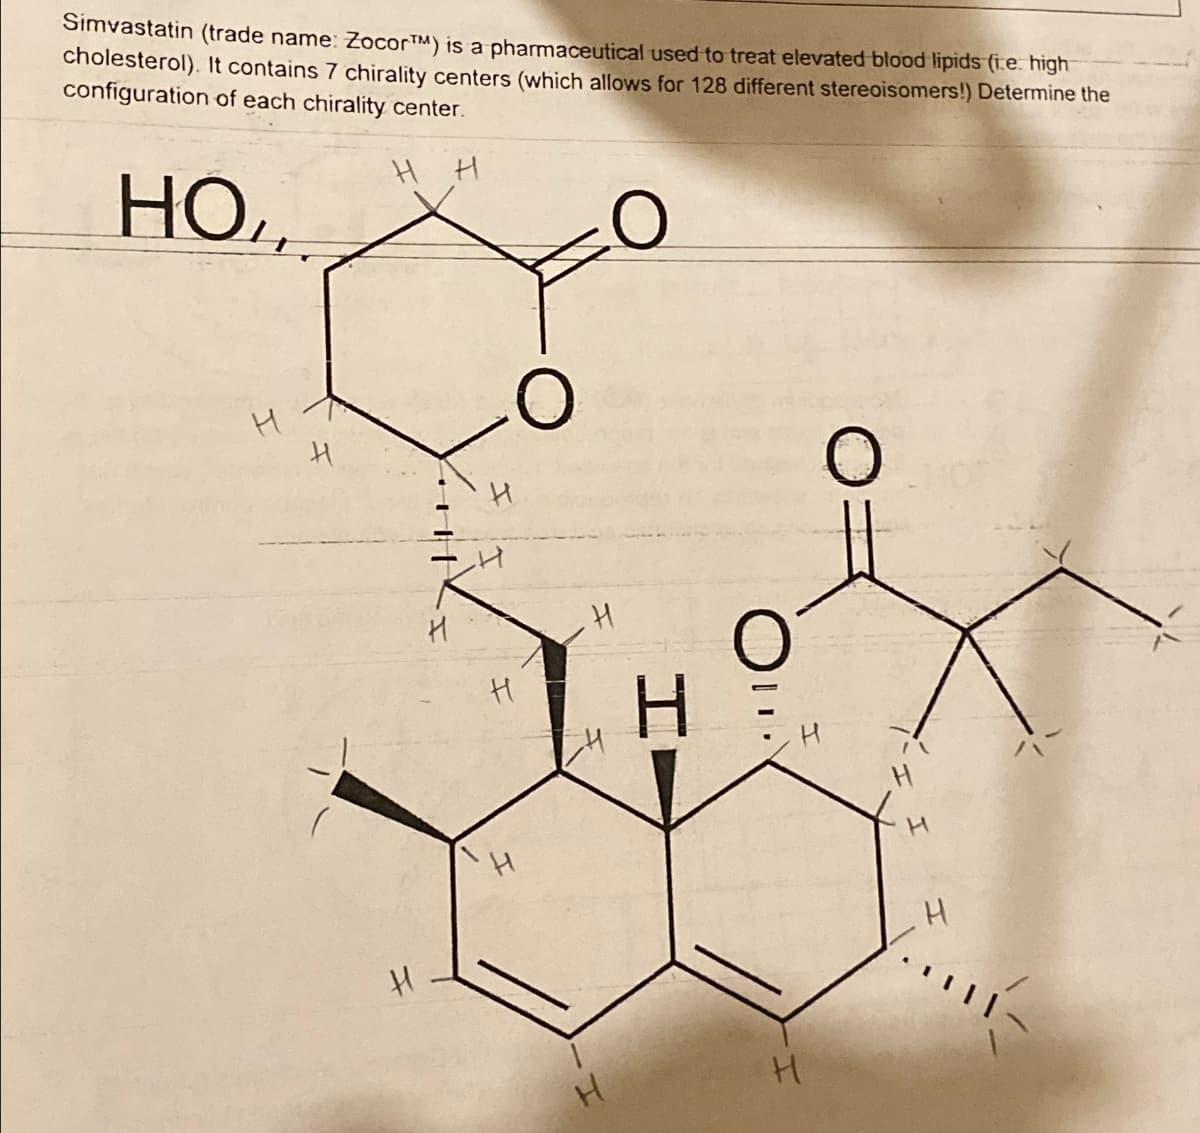 Simvastatin (trade name: ZocorTM) is a pharmaceutical used to treat elevated blood lipids (i.e. high
cholesterol). It contains 7 chirality centers (which allows for 128 different stereoisomers!) Determine the
configuration of each chirality center.
H H
HO
H
H
H
H
H
H
H
H
H
O
H
H